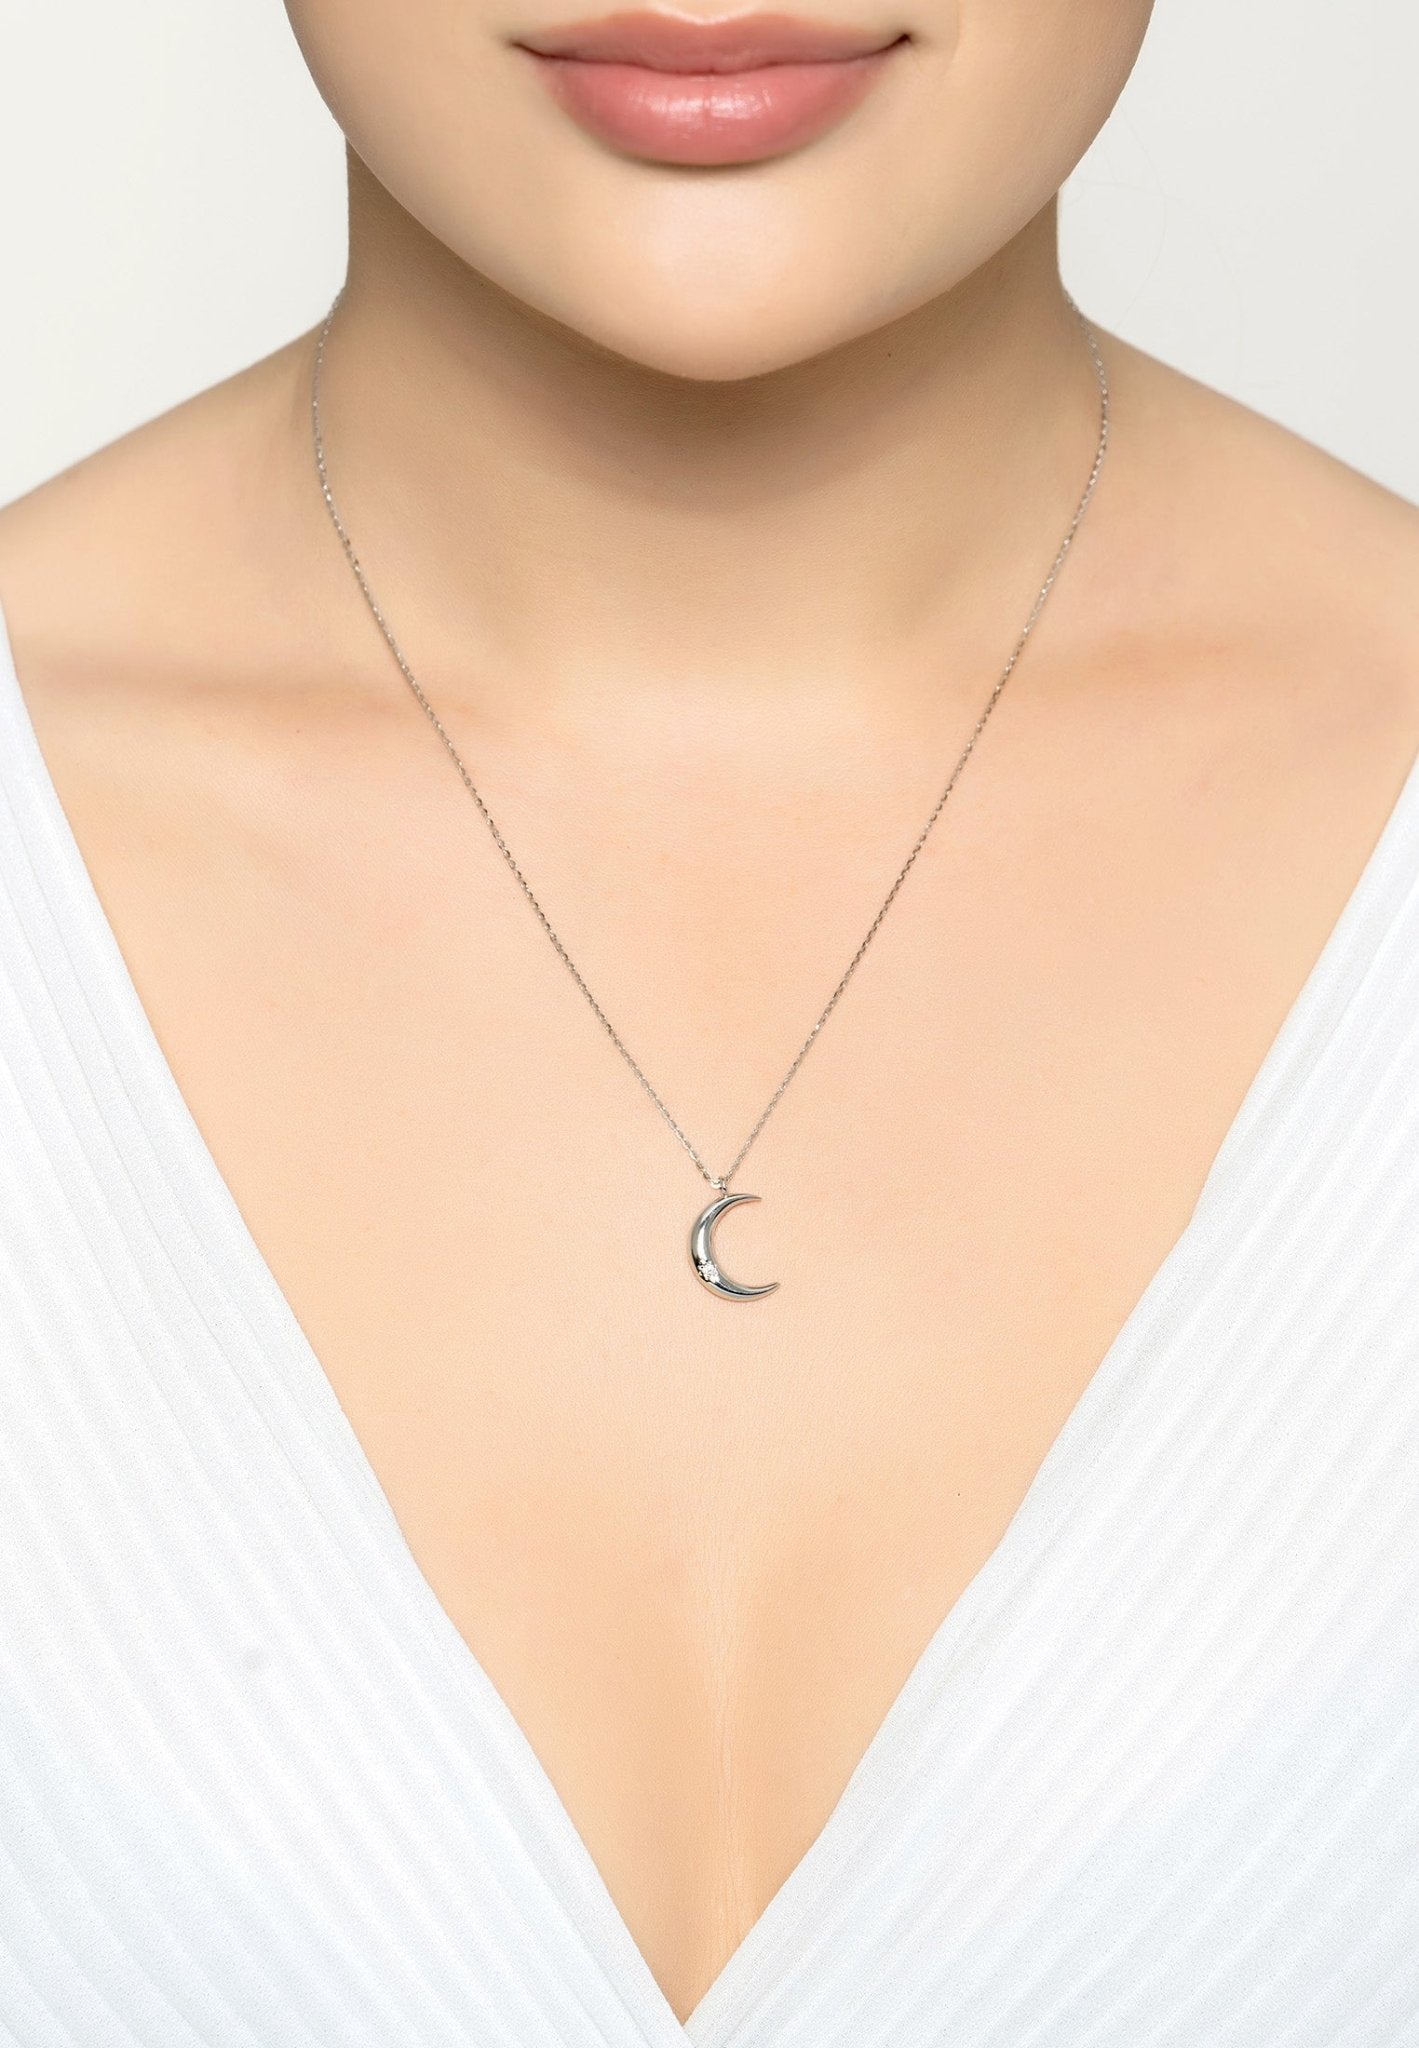 Crescent Moon With Star Necklace Silver - LATELITA Necklaces